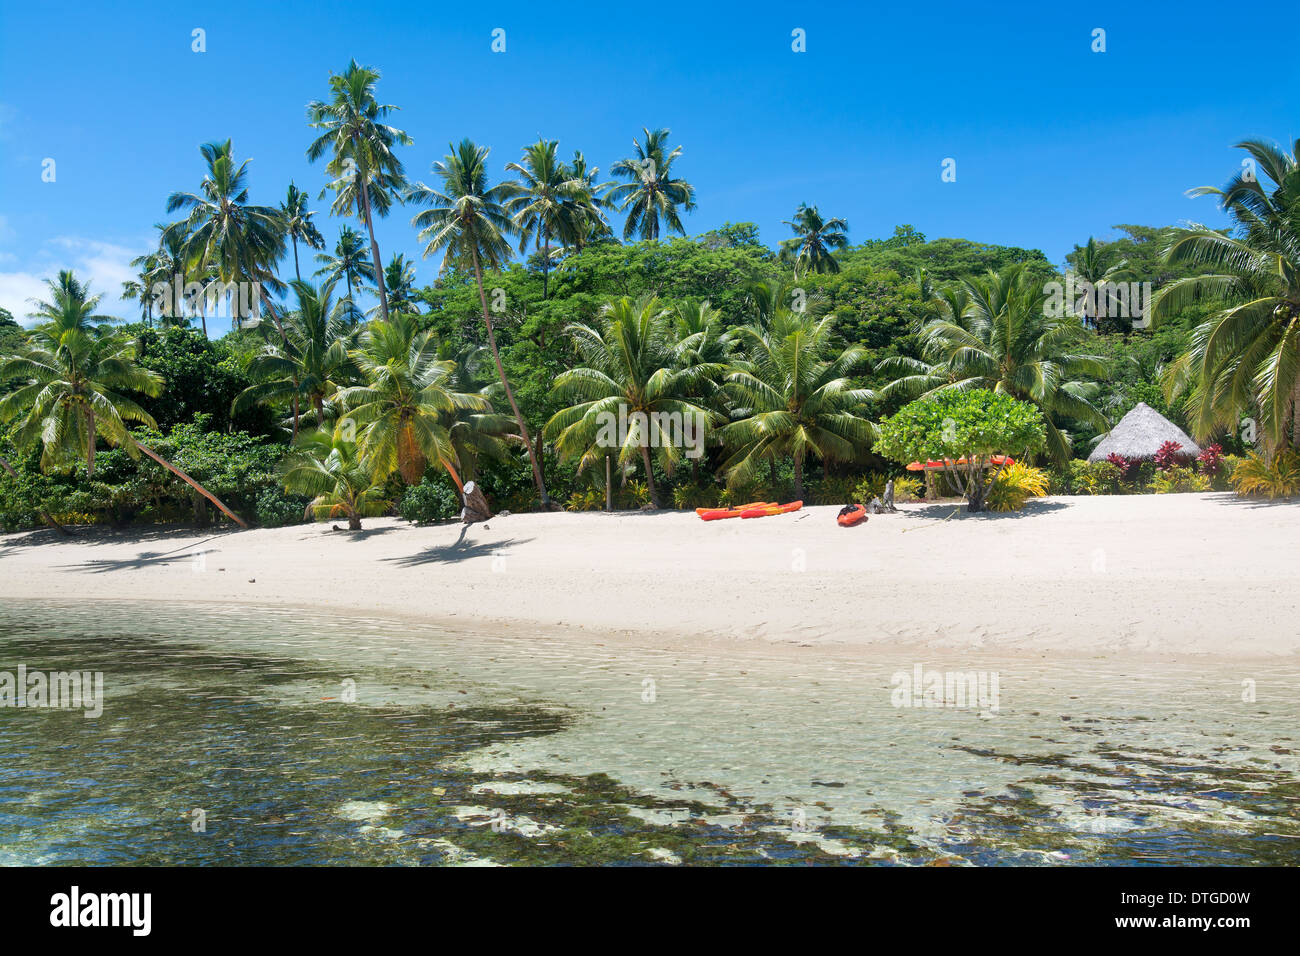 A look at a Fijian tropical resort from the water showing its lush surroundings and recreational kayaks on the beach Stock Photo